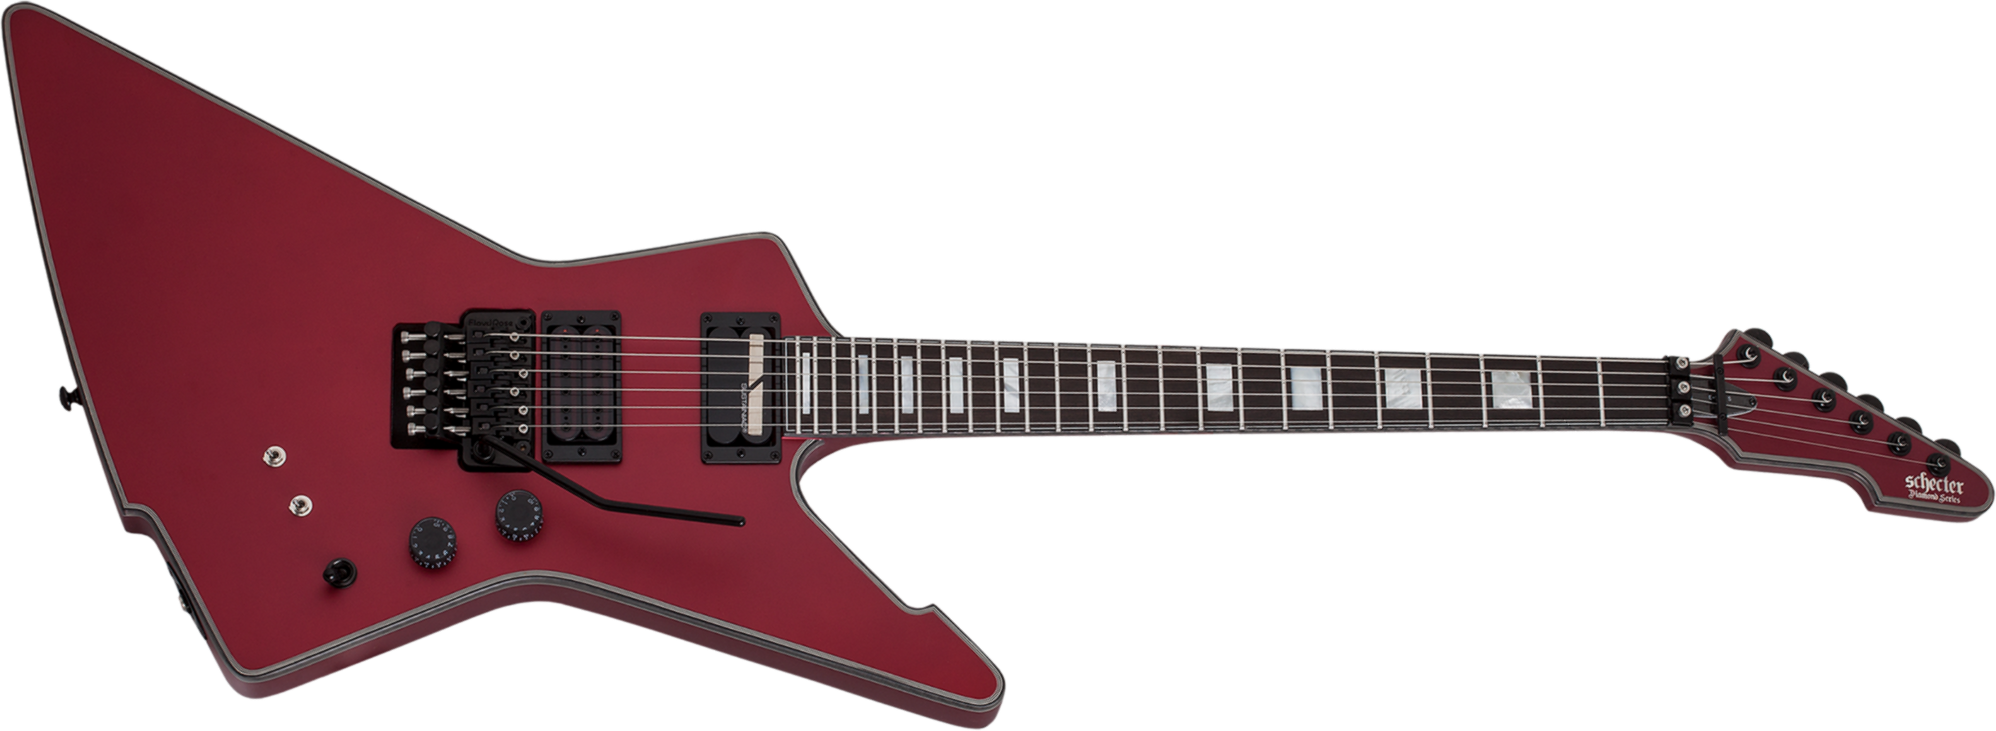 Schecter E-1 Fr S Special Edition 2h Sustainiac Fr Eb - Satin Candy Apple Red - E-Gitarre aus Metall - Main picture